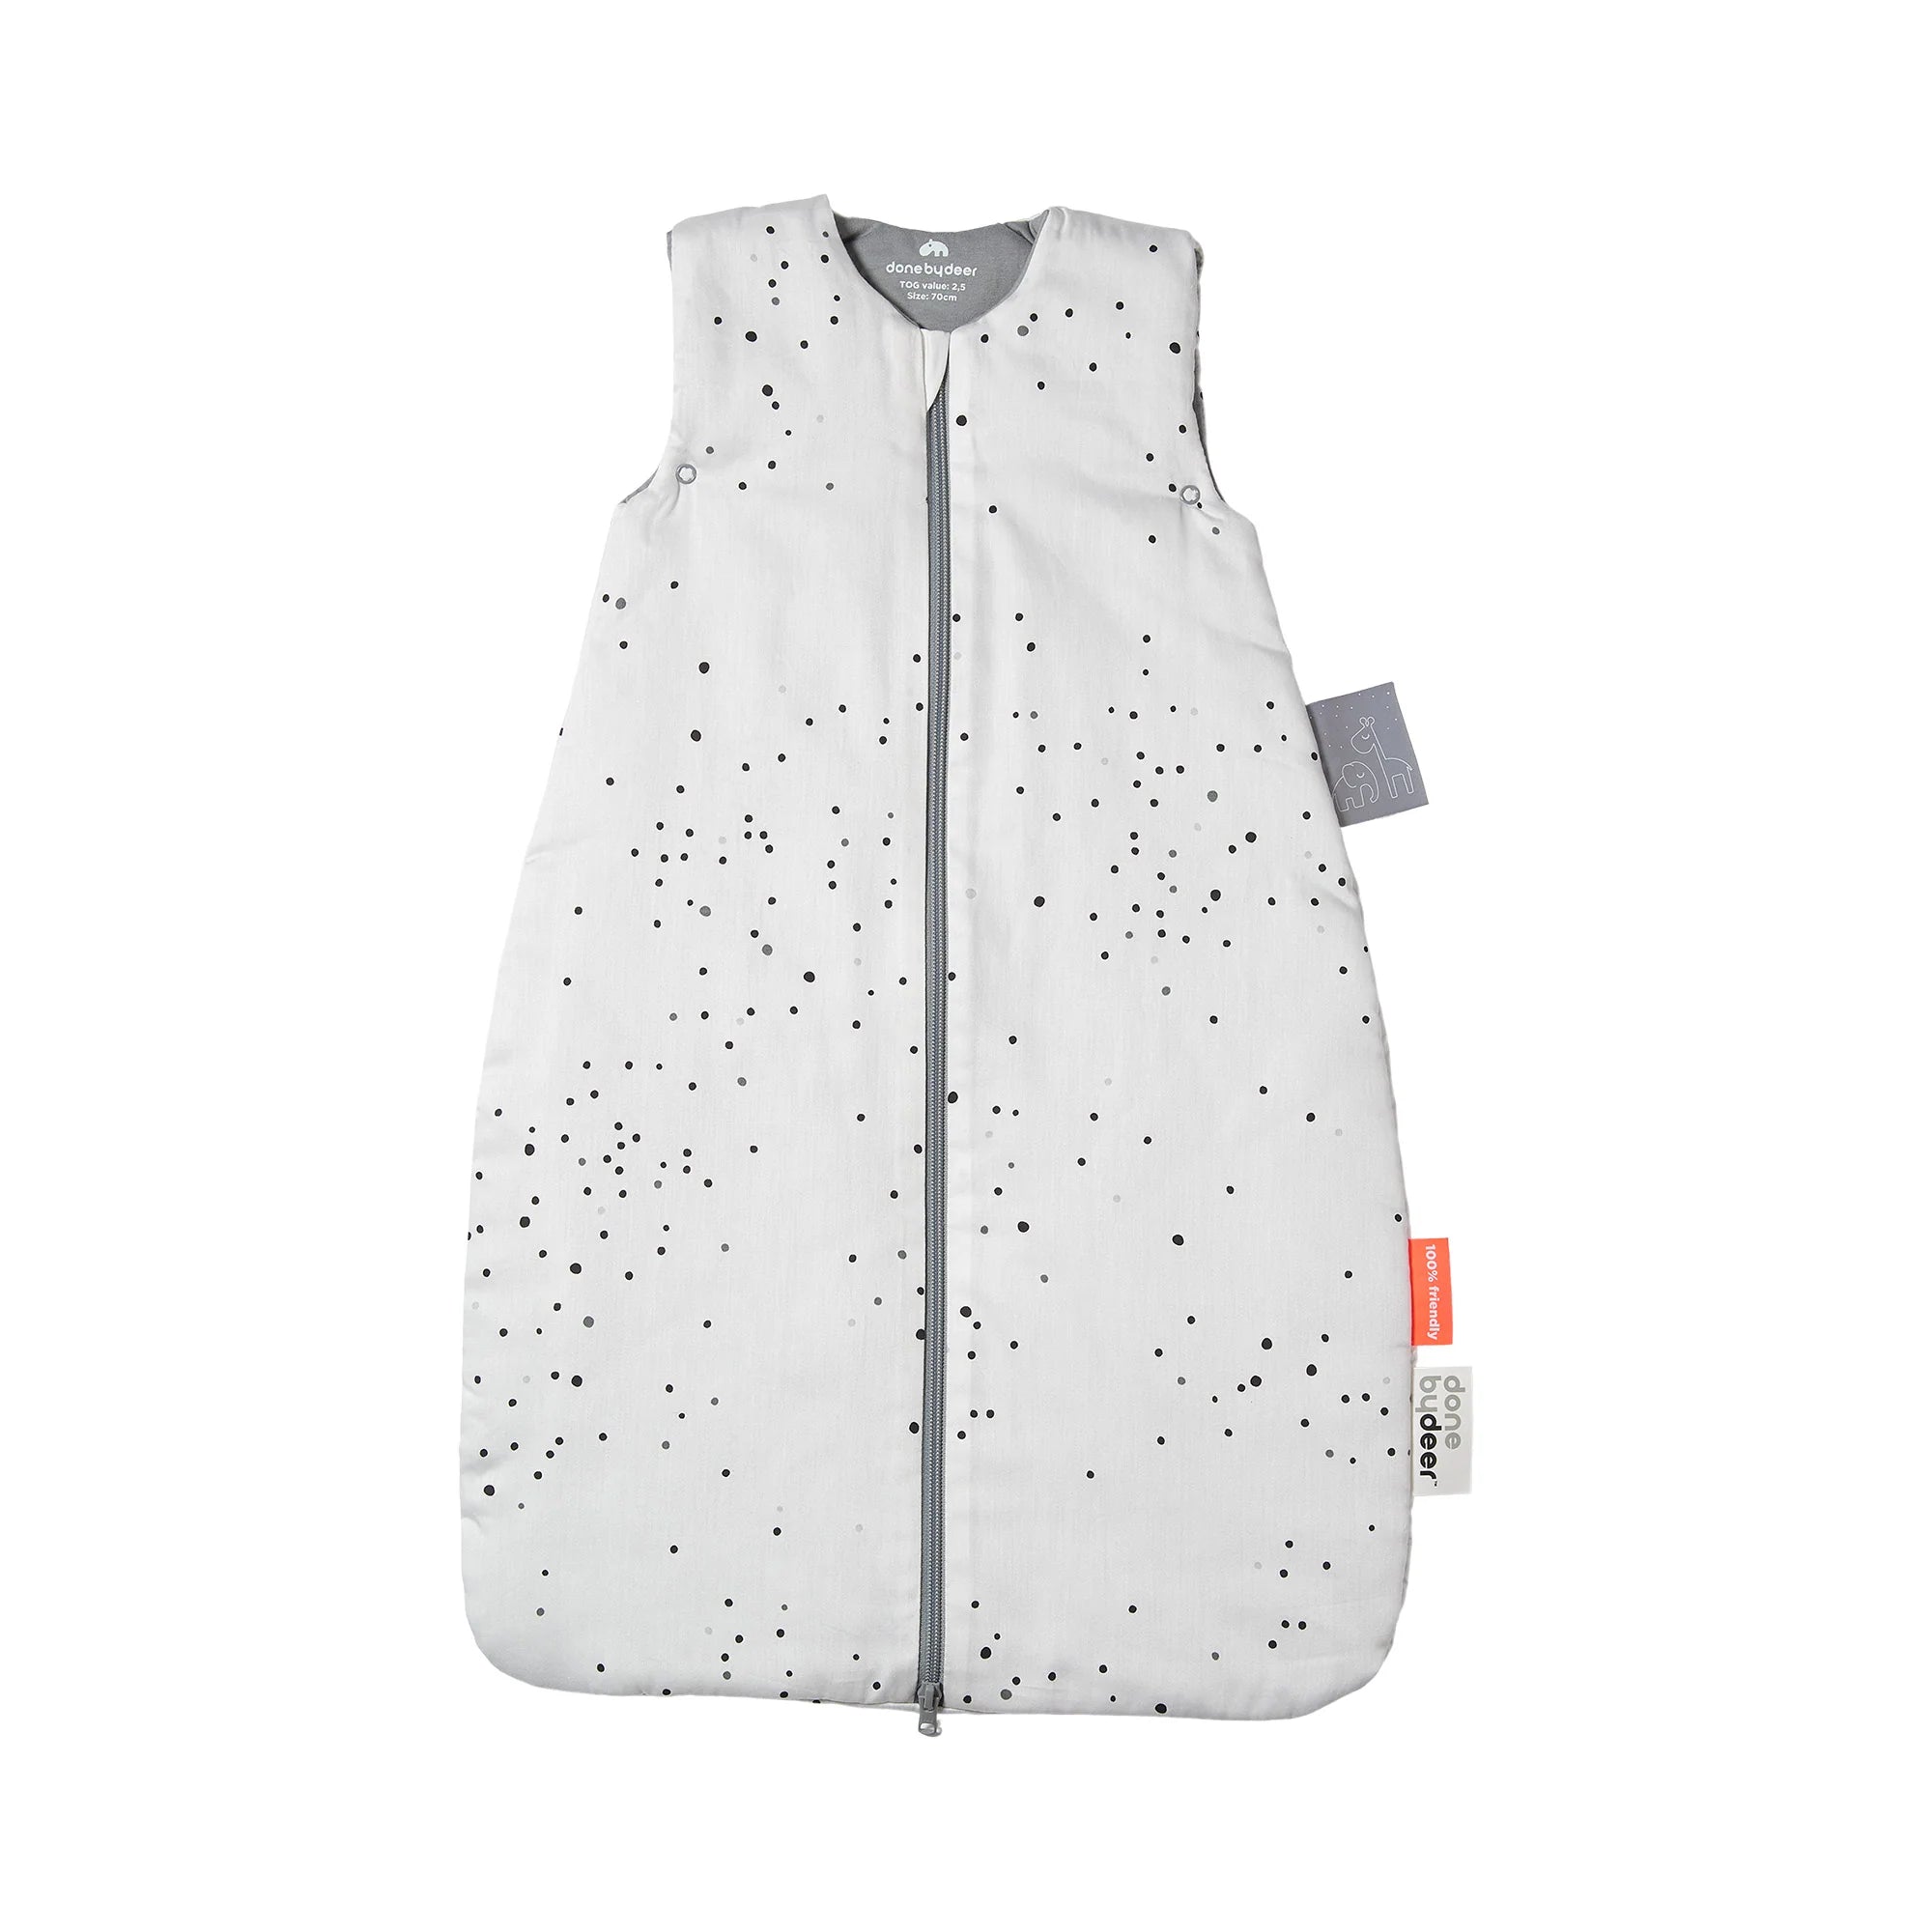 An image of White Baby Sleeping Bag 70cm - 2.5 Tog - Dreamy Dots 70cm